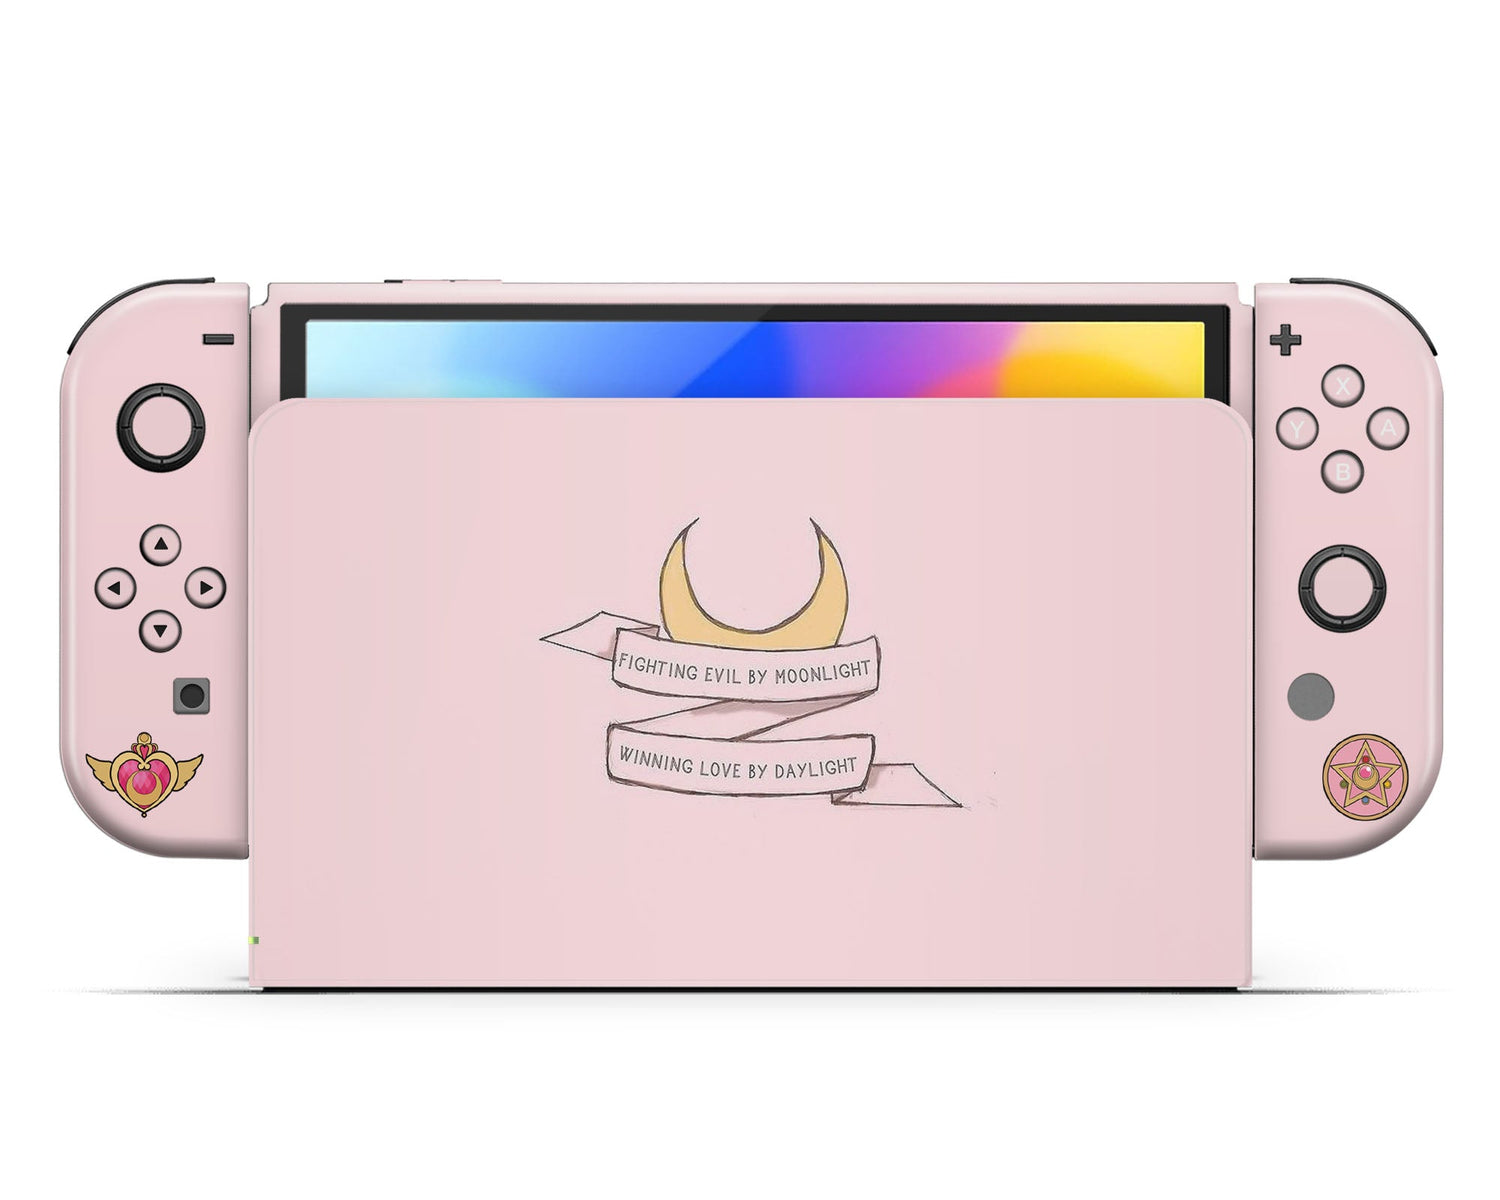 Lux Skins Nintendo Switch OLED Sailor Moon Fighting Evil By Moonlight Full Set +Tempered Glass Skins - Pop culture Sailor Moon Skin